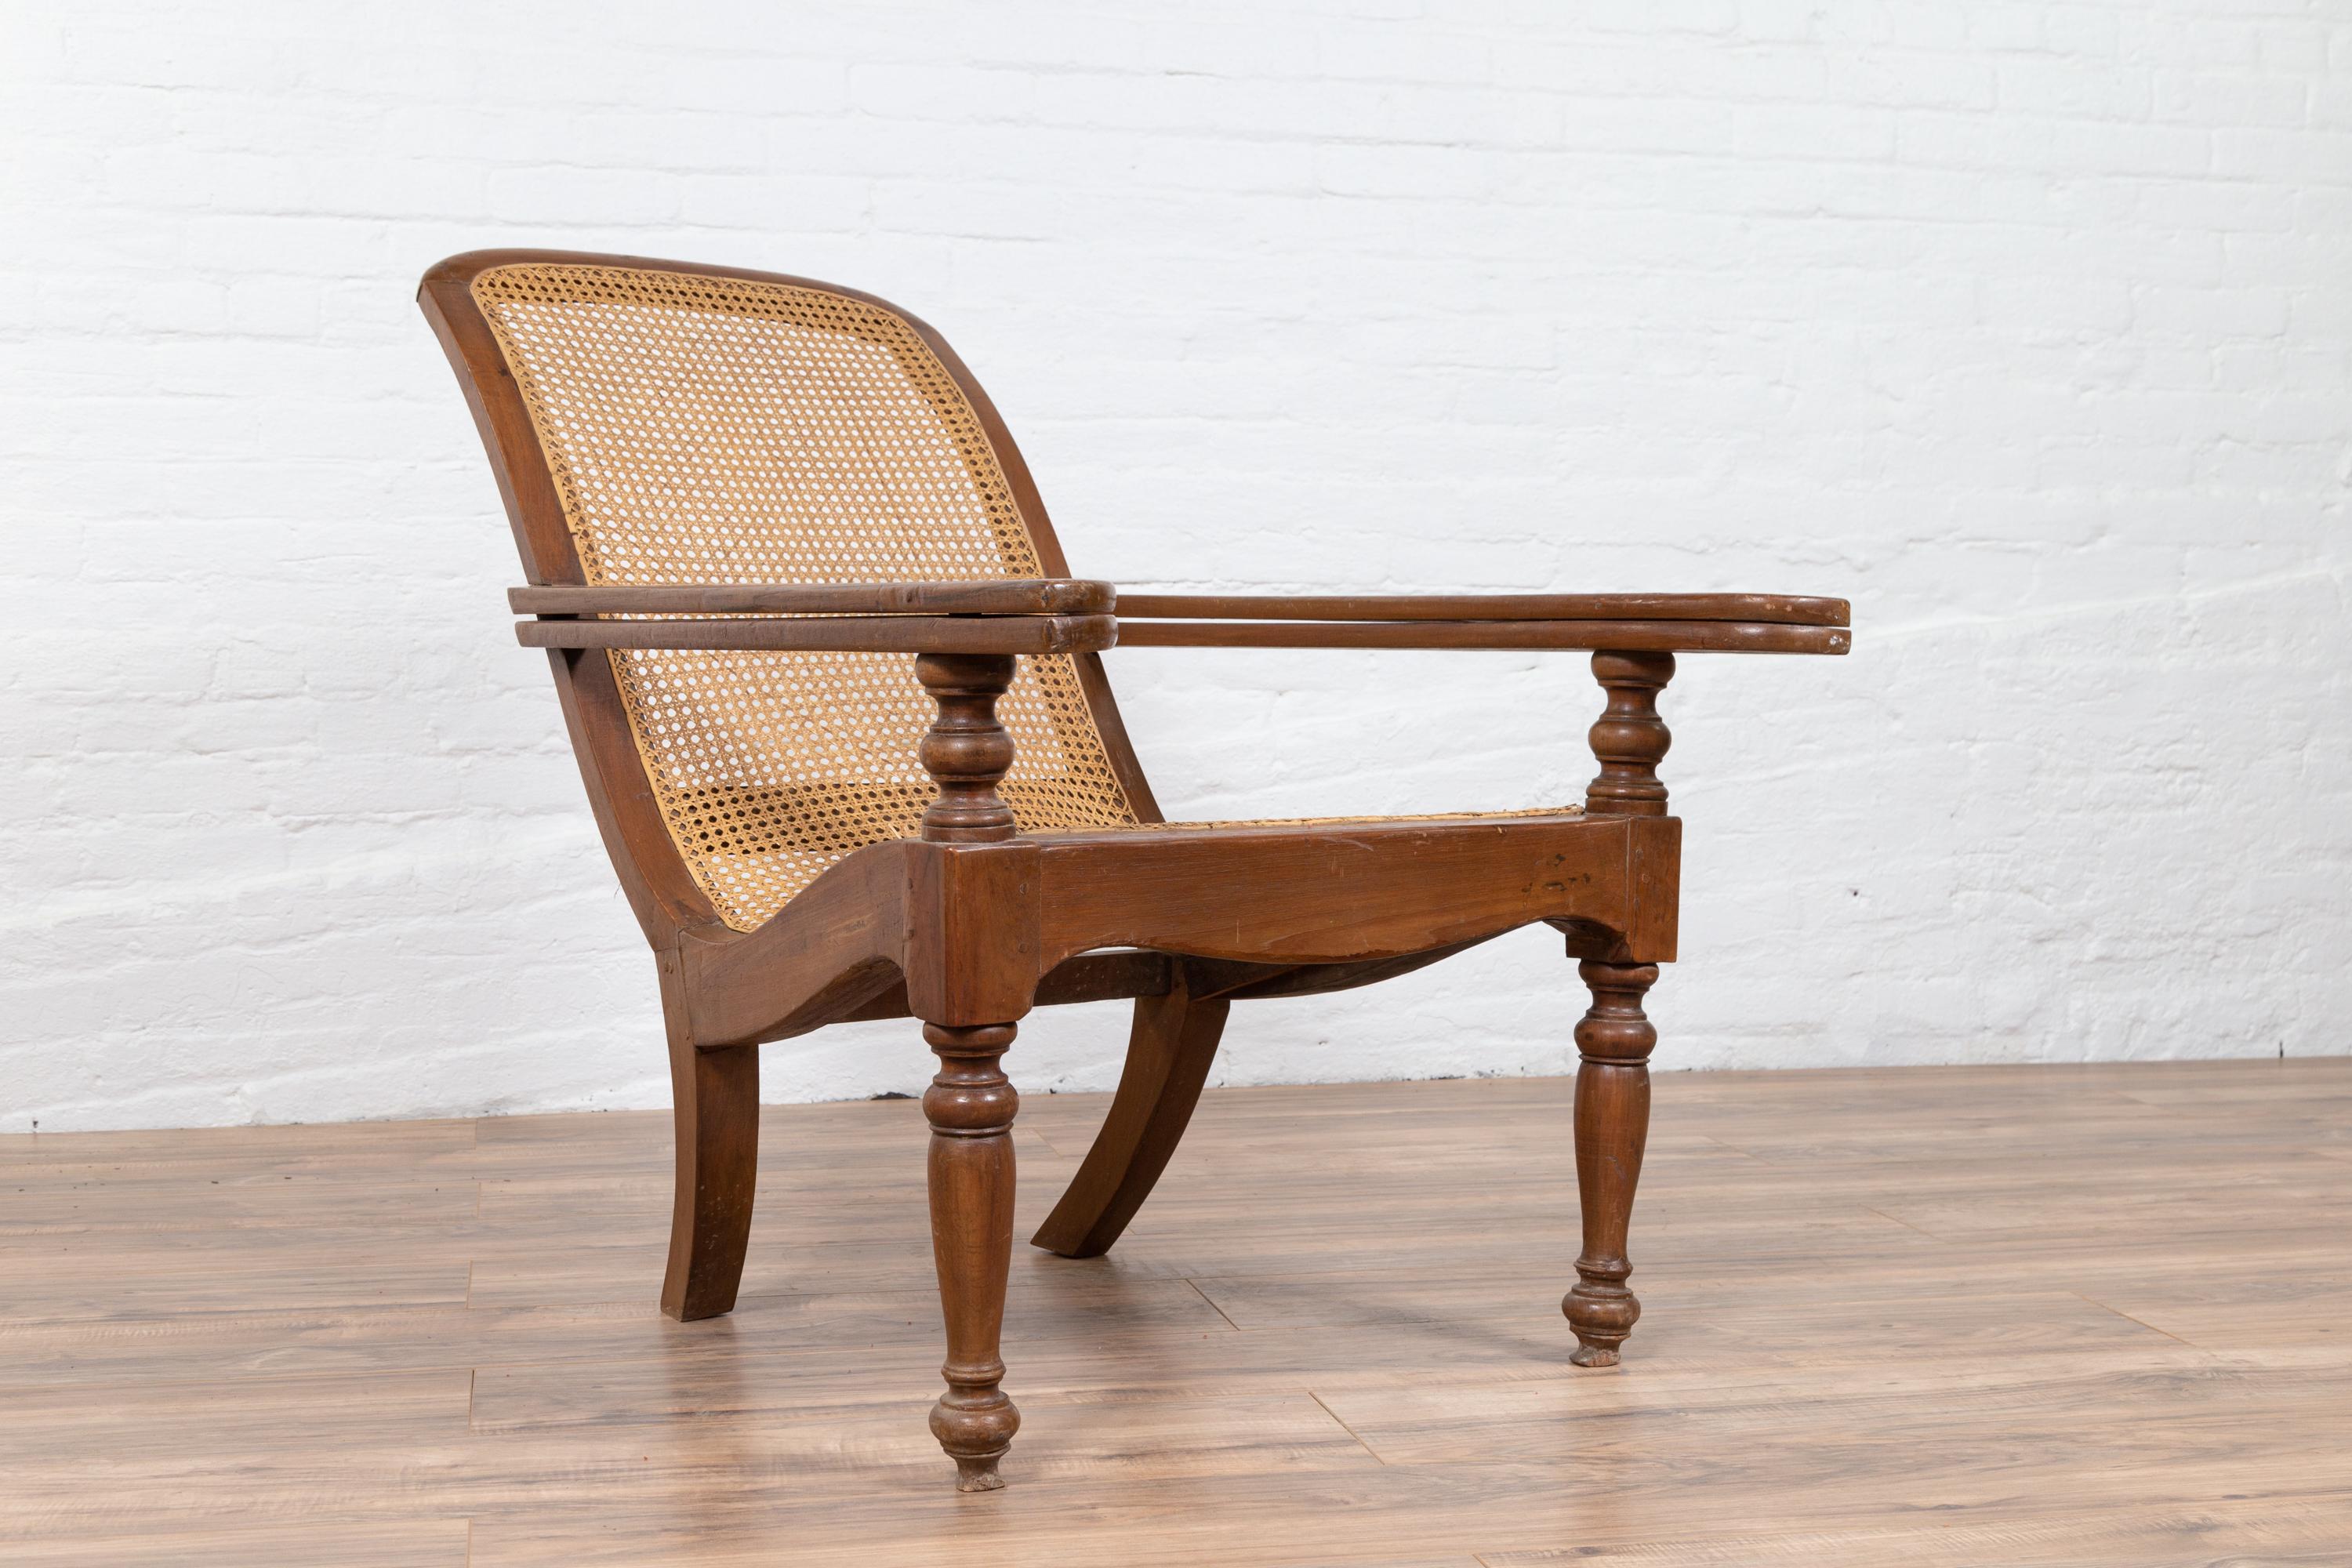 Indonesian Antique Dutch Colonial Plantation Lounge Chair with Curving Seat and Rattan